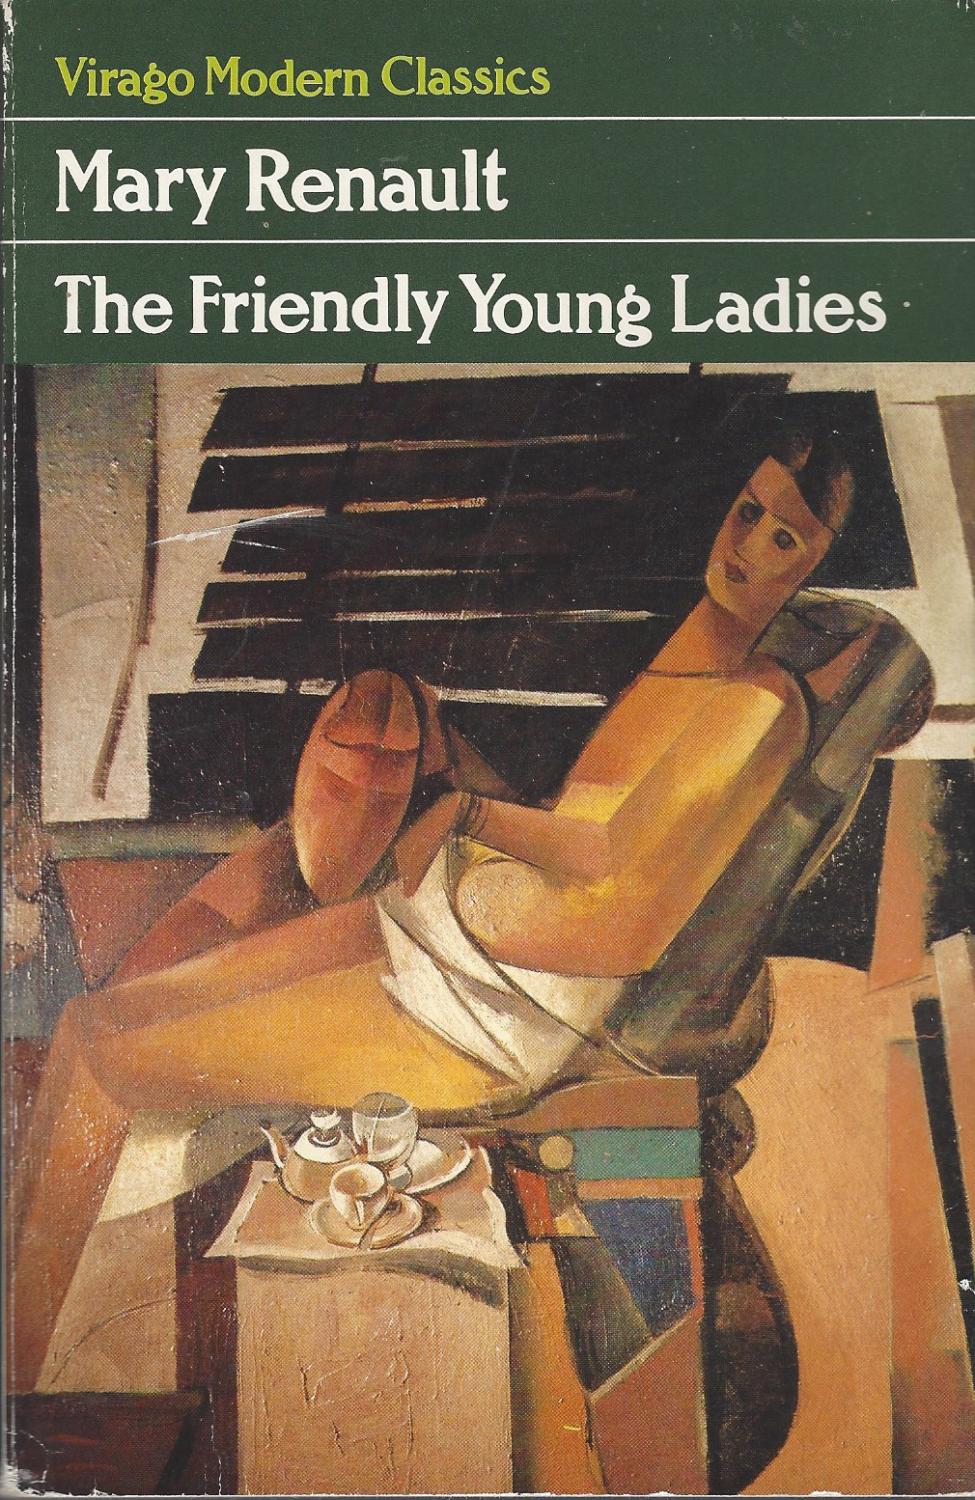 The Friendly Young Ladies A Virago Modern Classic - Renault, Mary & Sarah Dunant